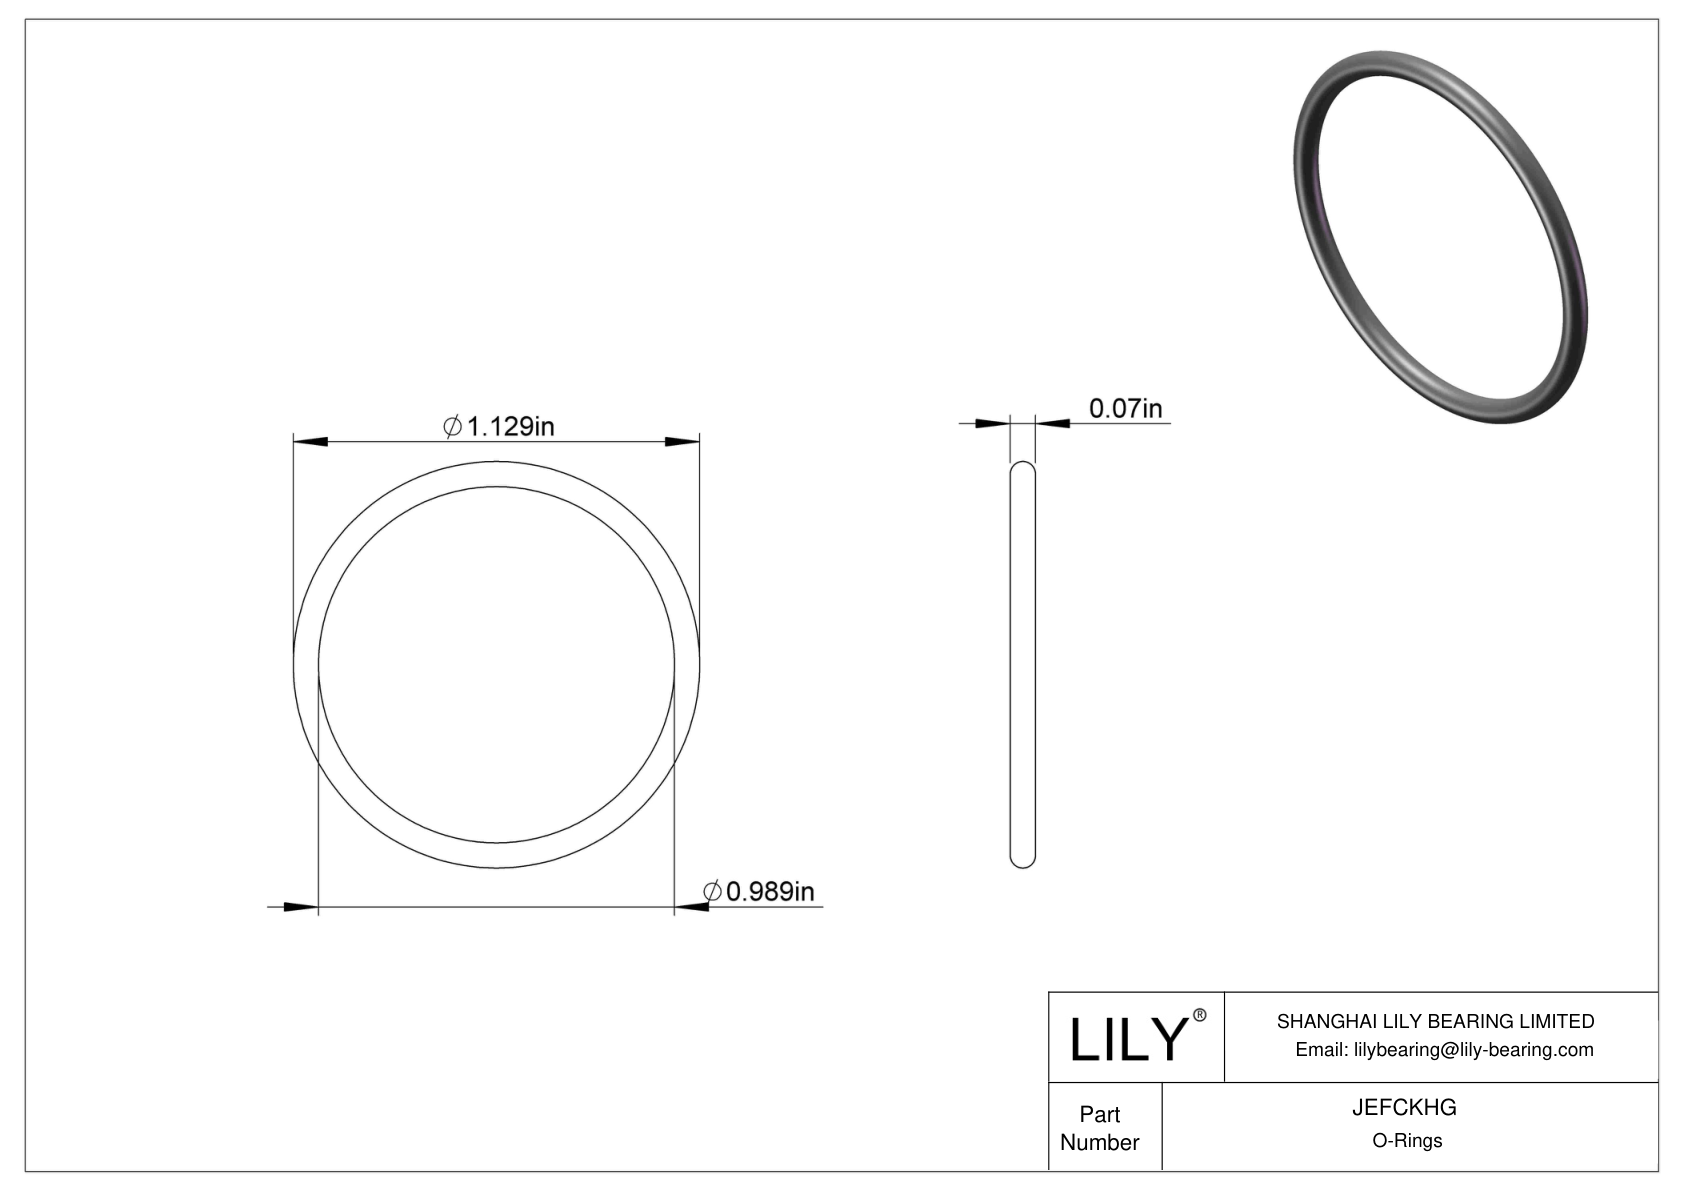 9452K76 | Oil Resistant O-Rings Round | Lily Bearing